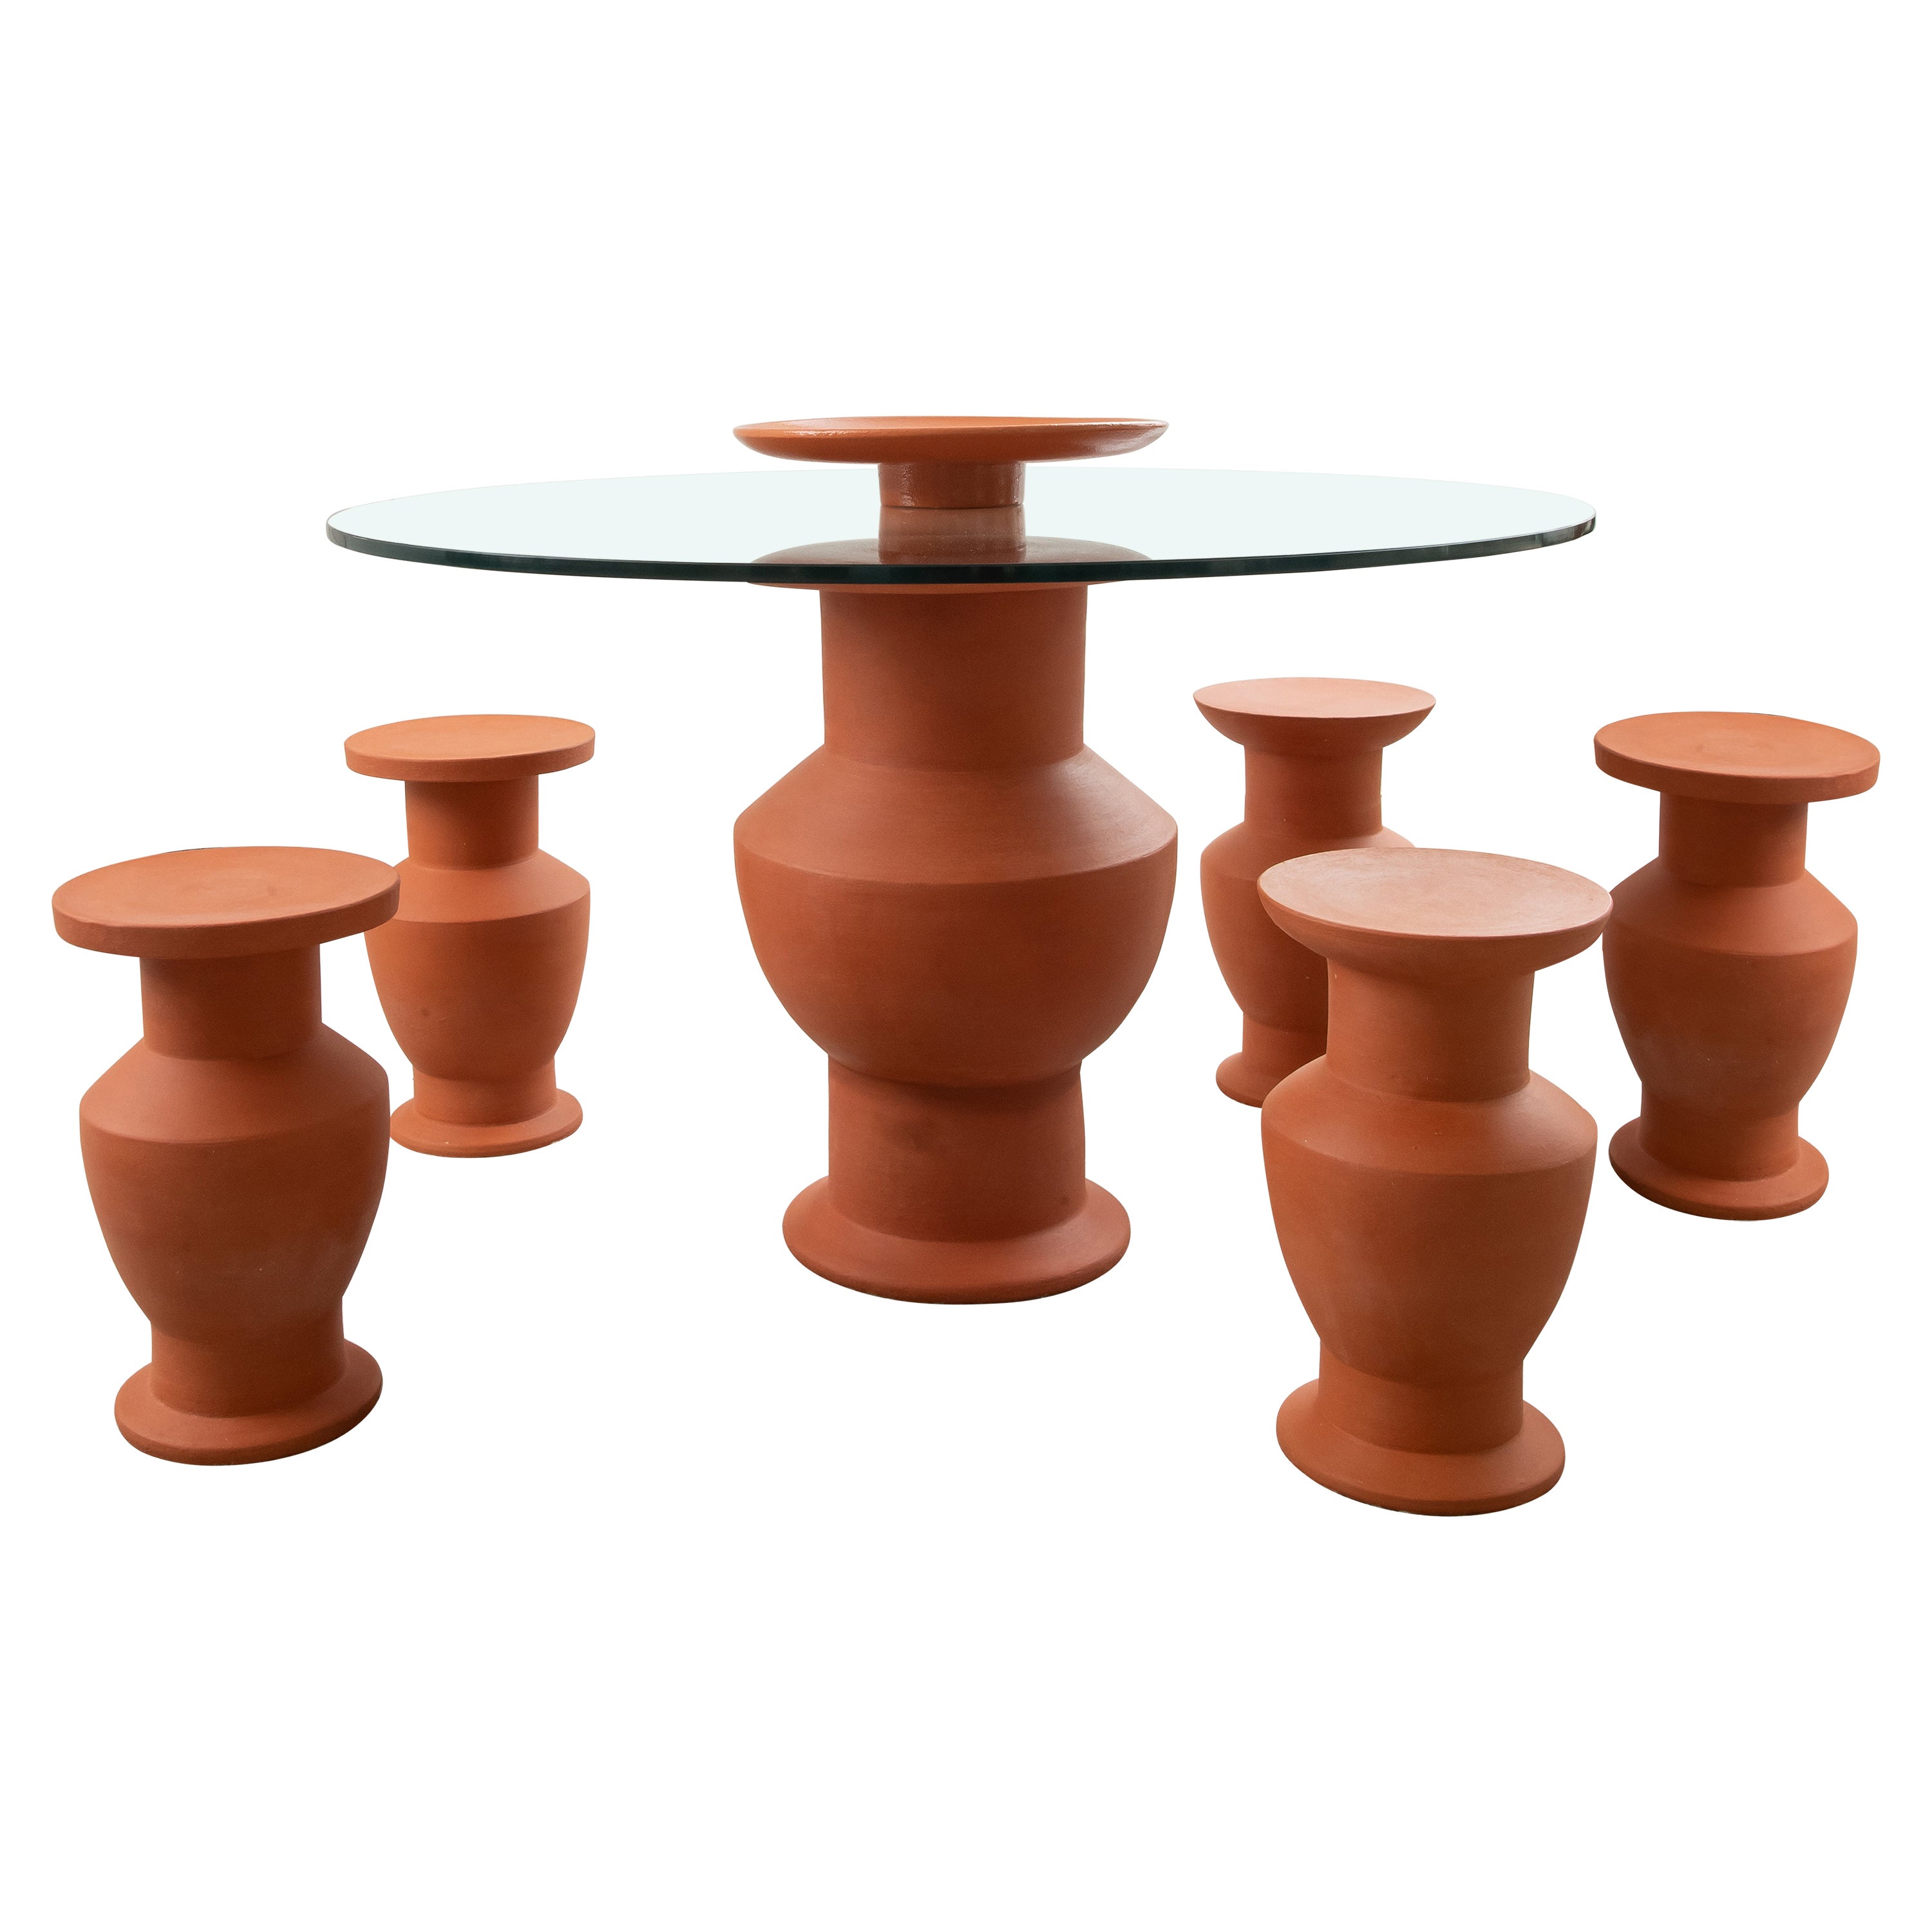 Contemporary Terracotta Ceramic Dining Table and Stools by Léa Ginac, 2022 For Sale